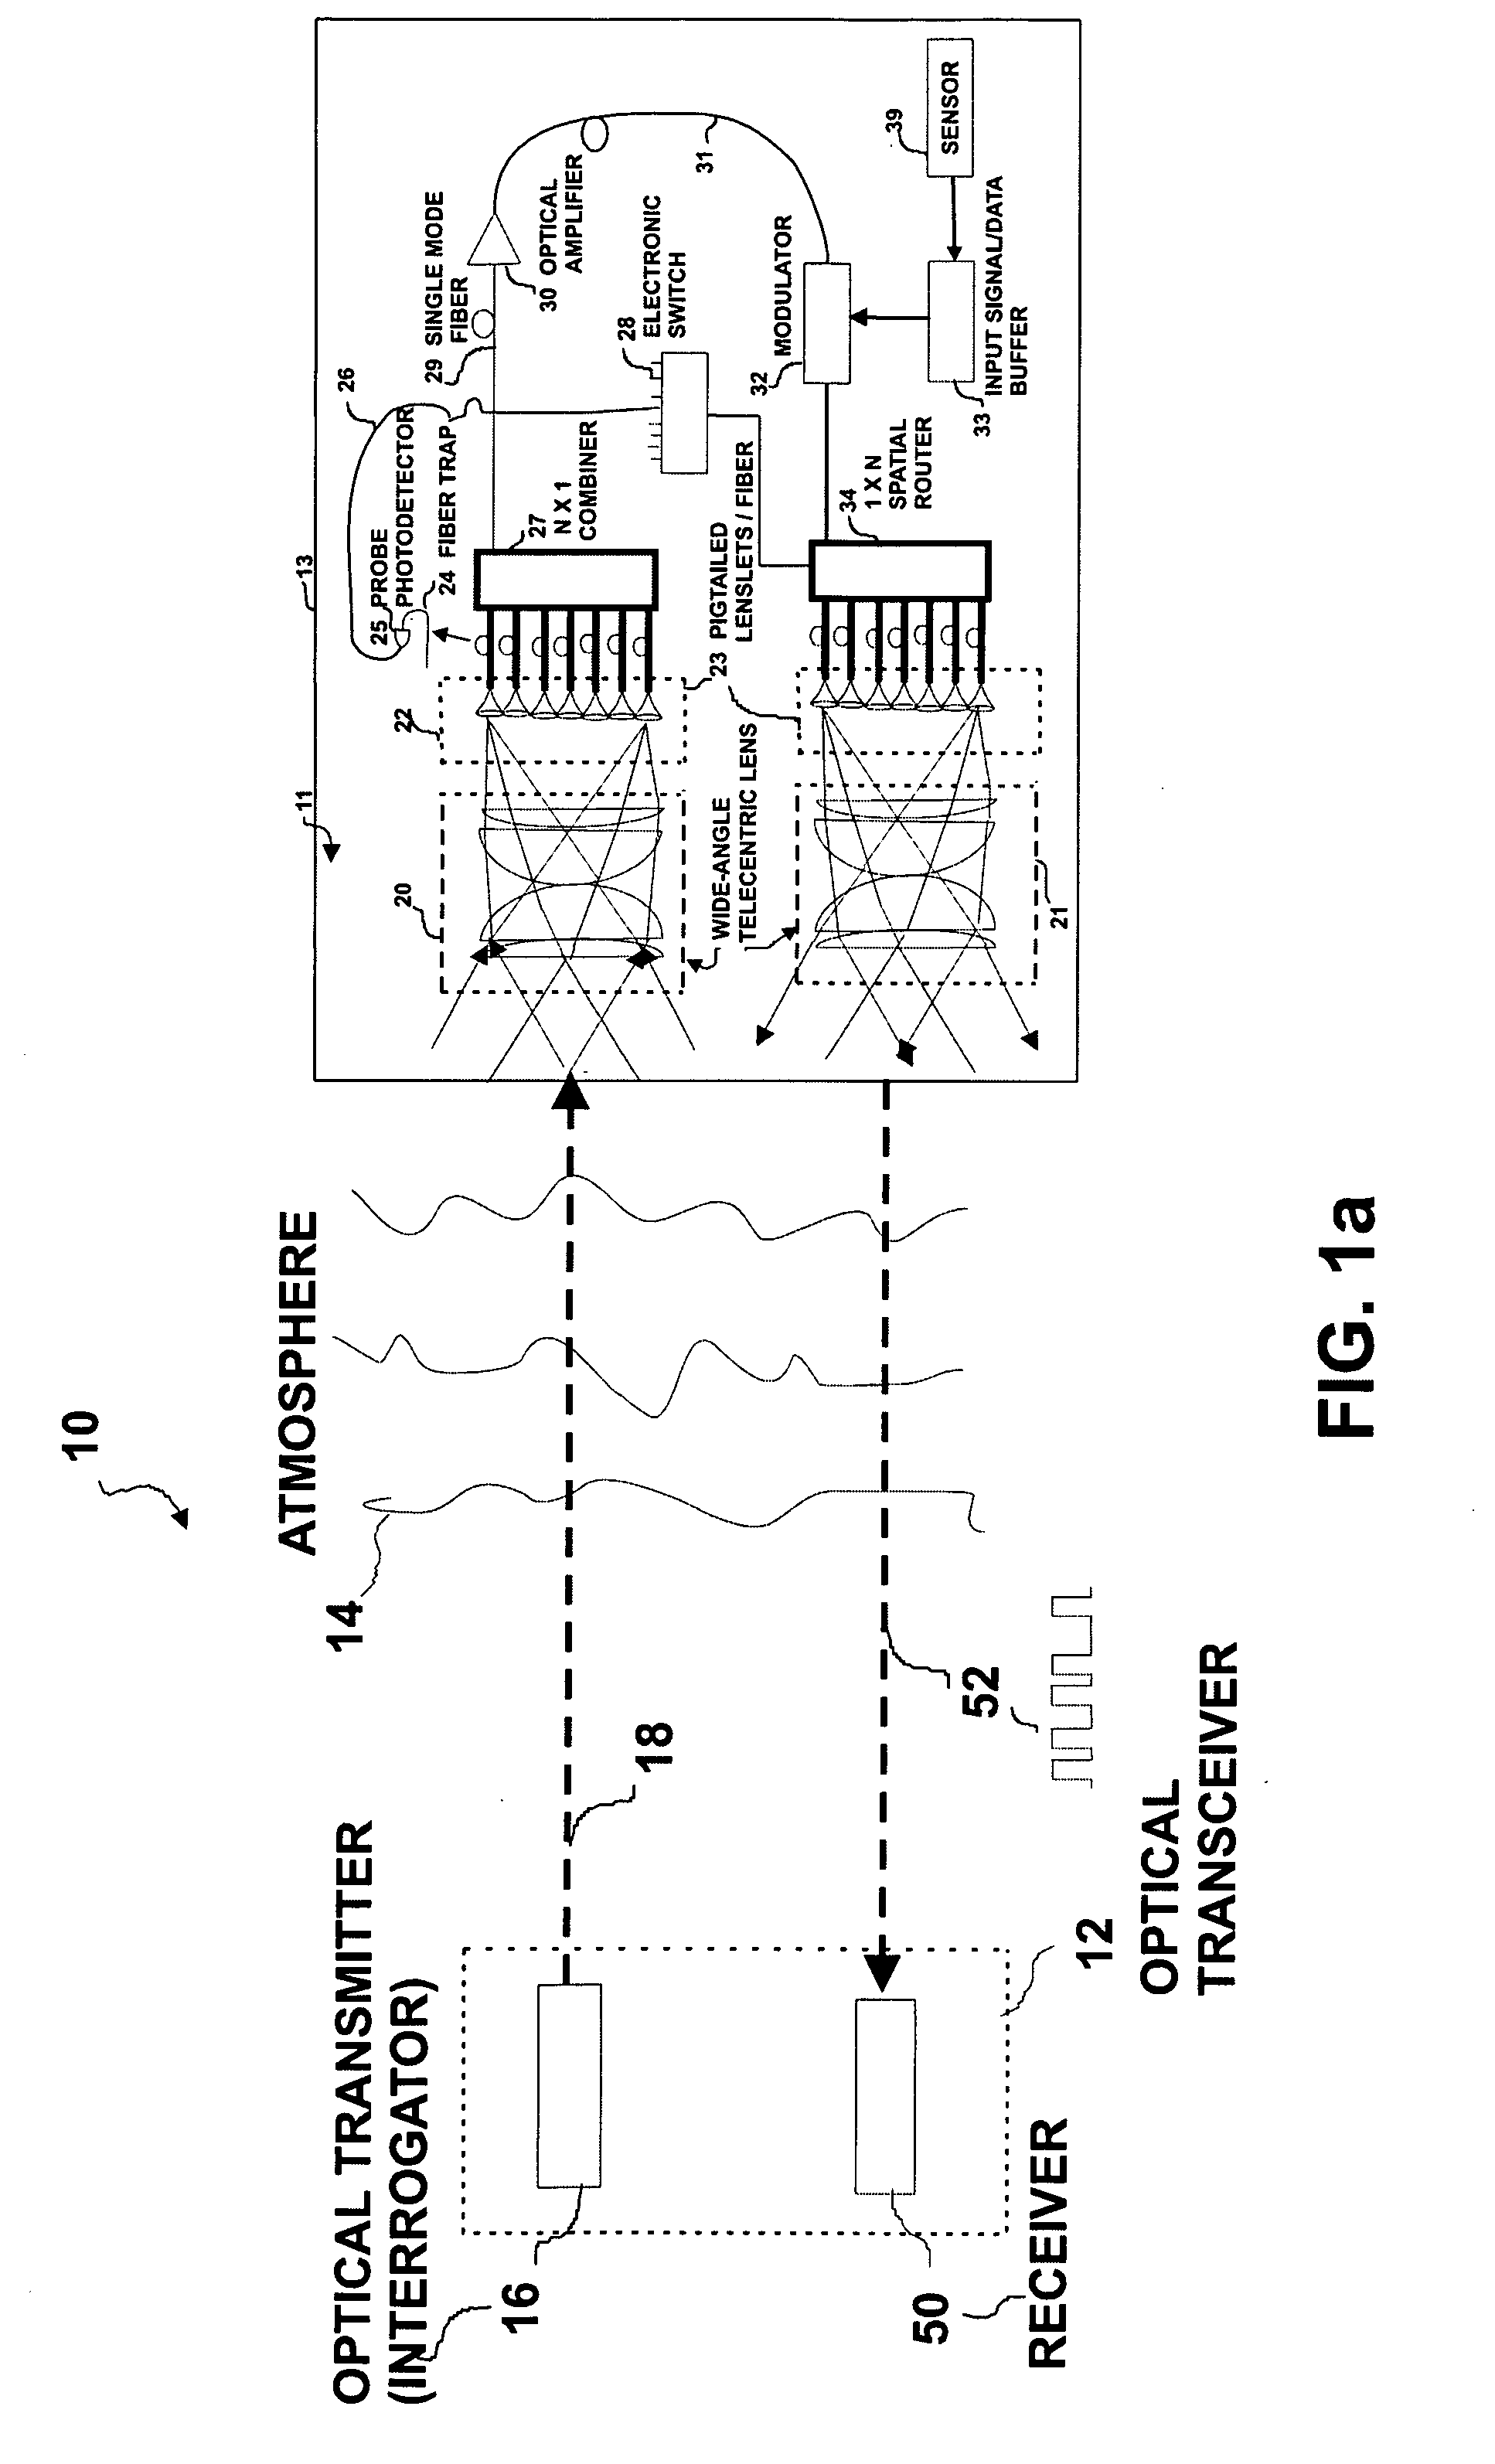 Wide field-of-view amplified fiber-retro for secure high data rate communications and remote data transfer